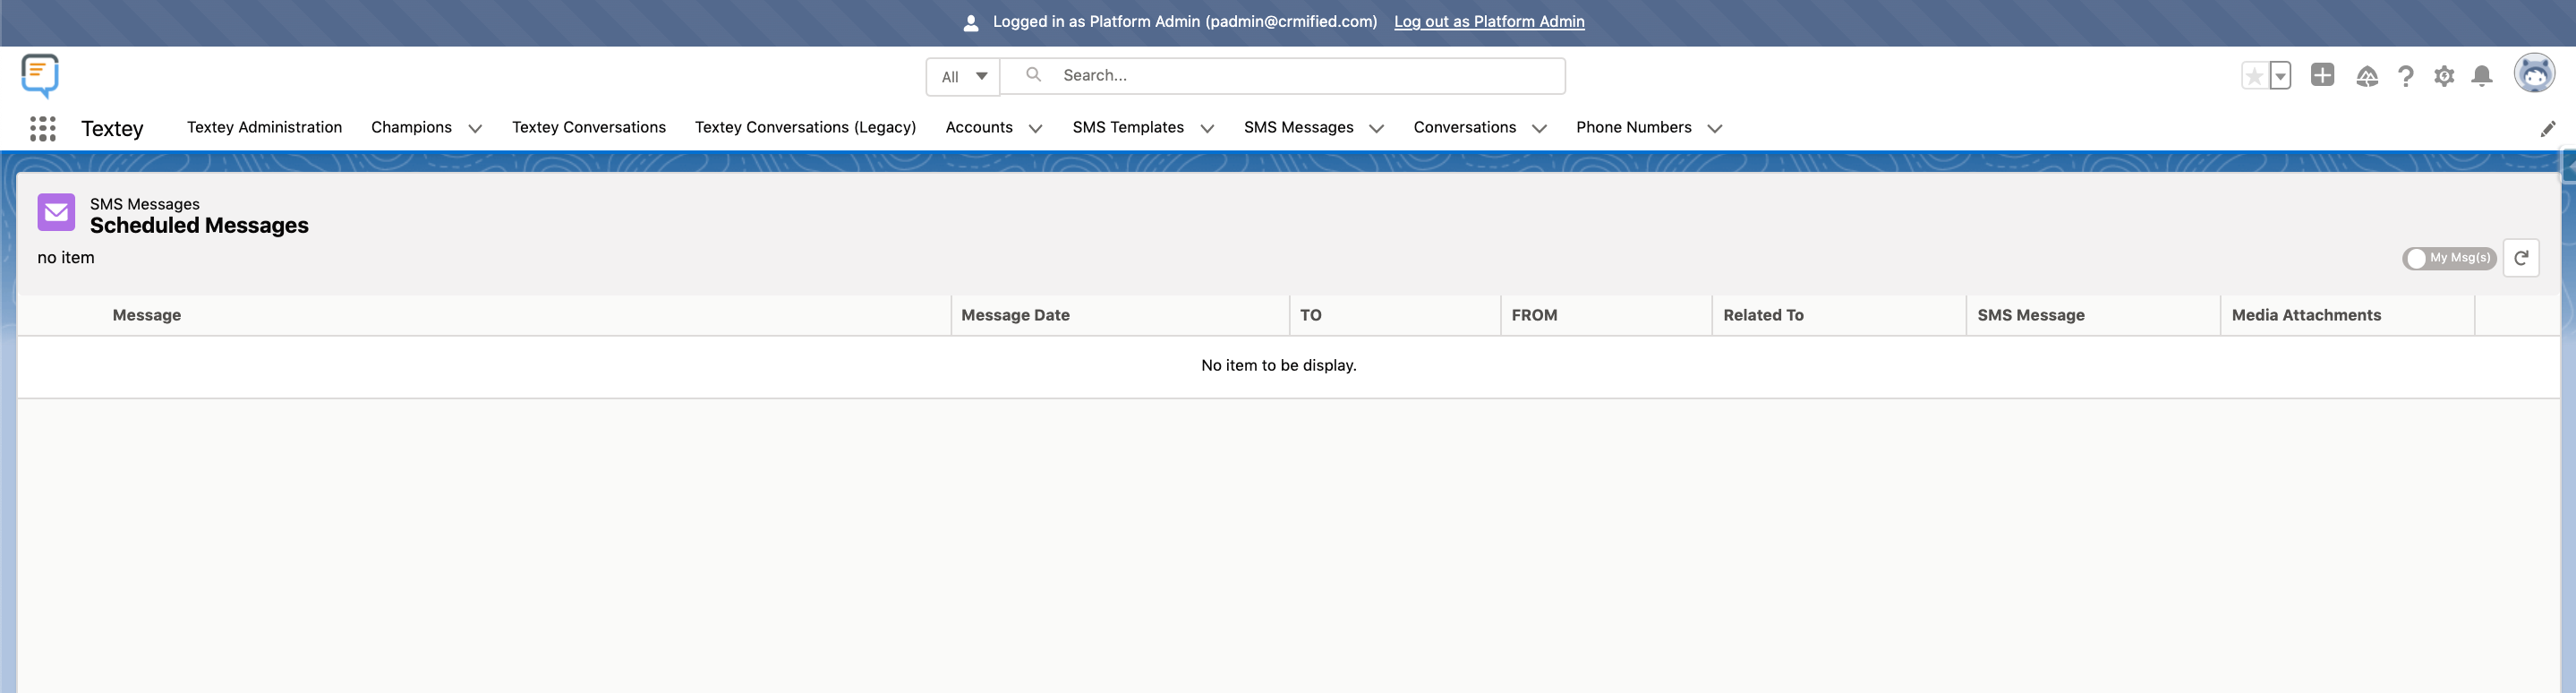 additional features-schedule_sms_msgs 3